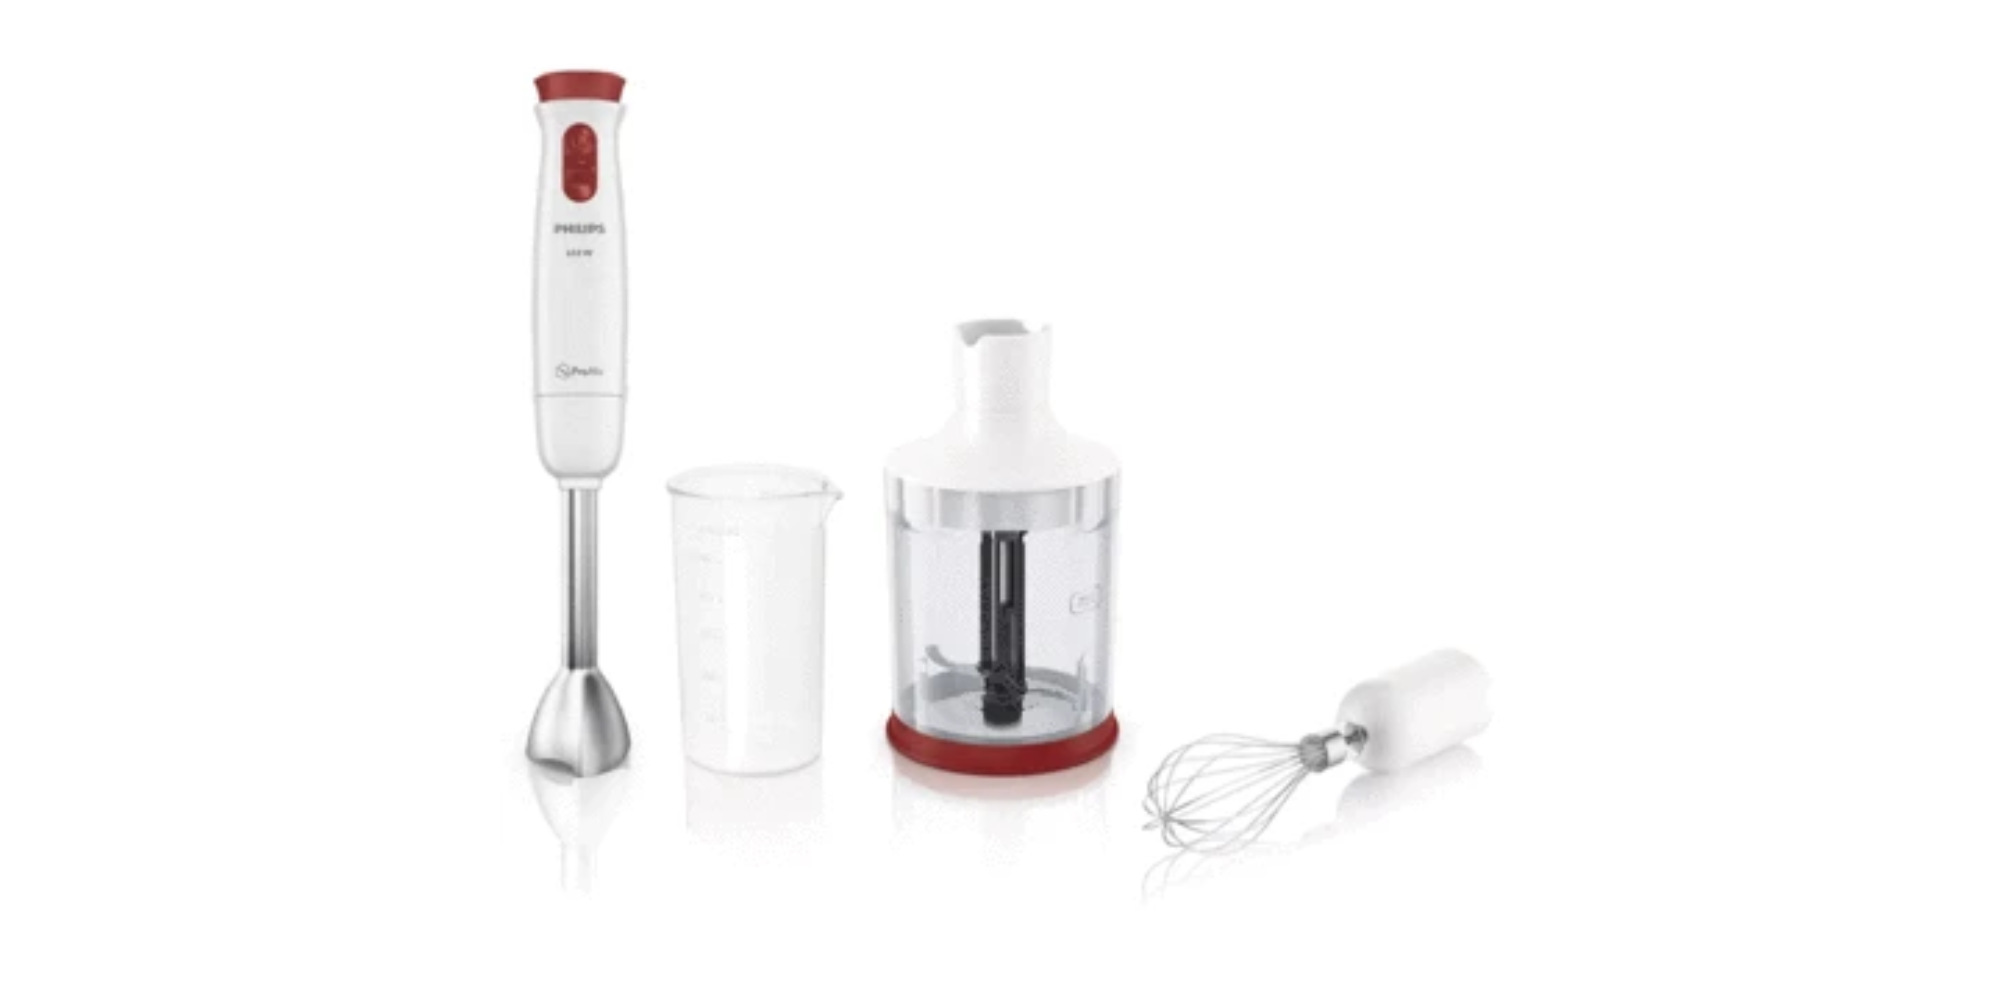 PHILIPS DAILY COLLECTION HAND BLENDER - خلاط كهربائي محمول باليد